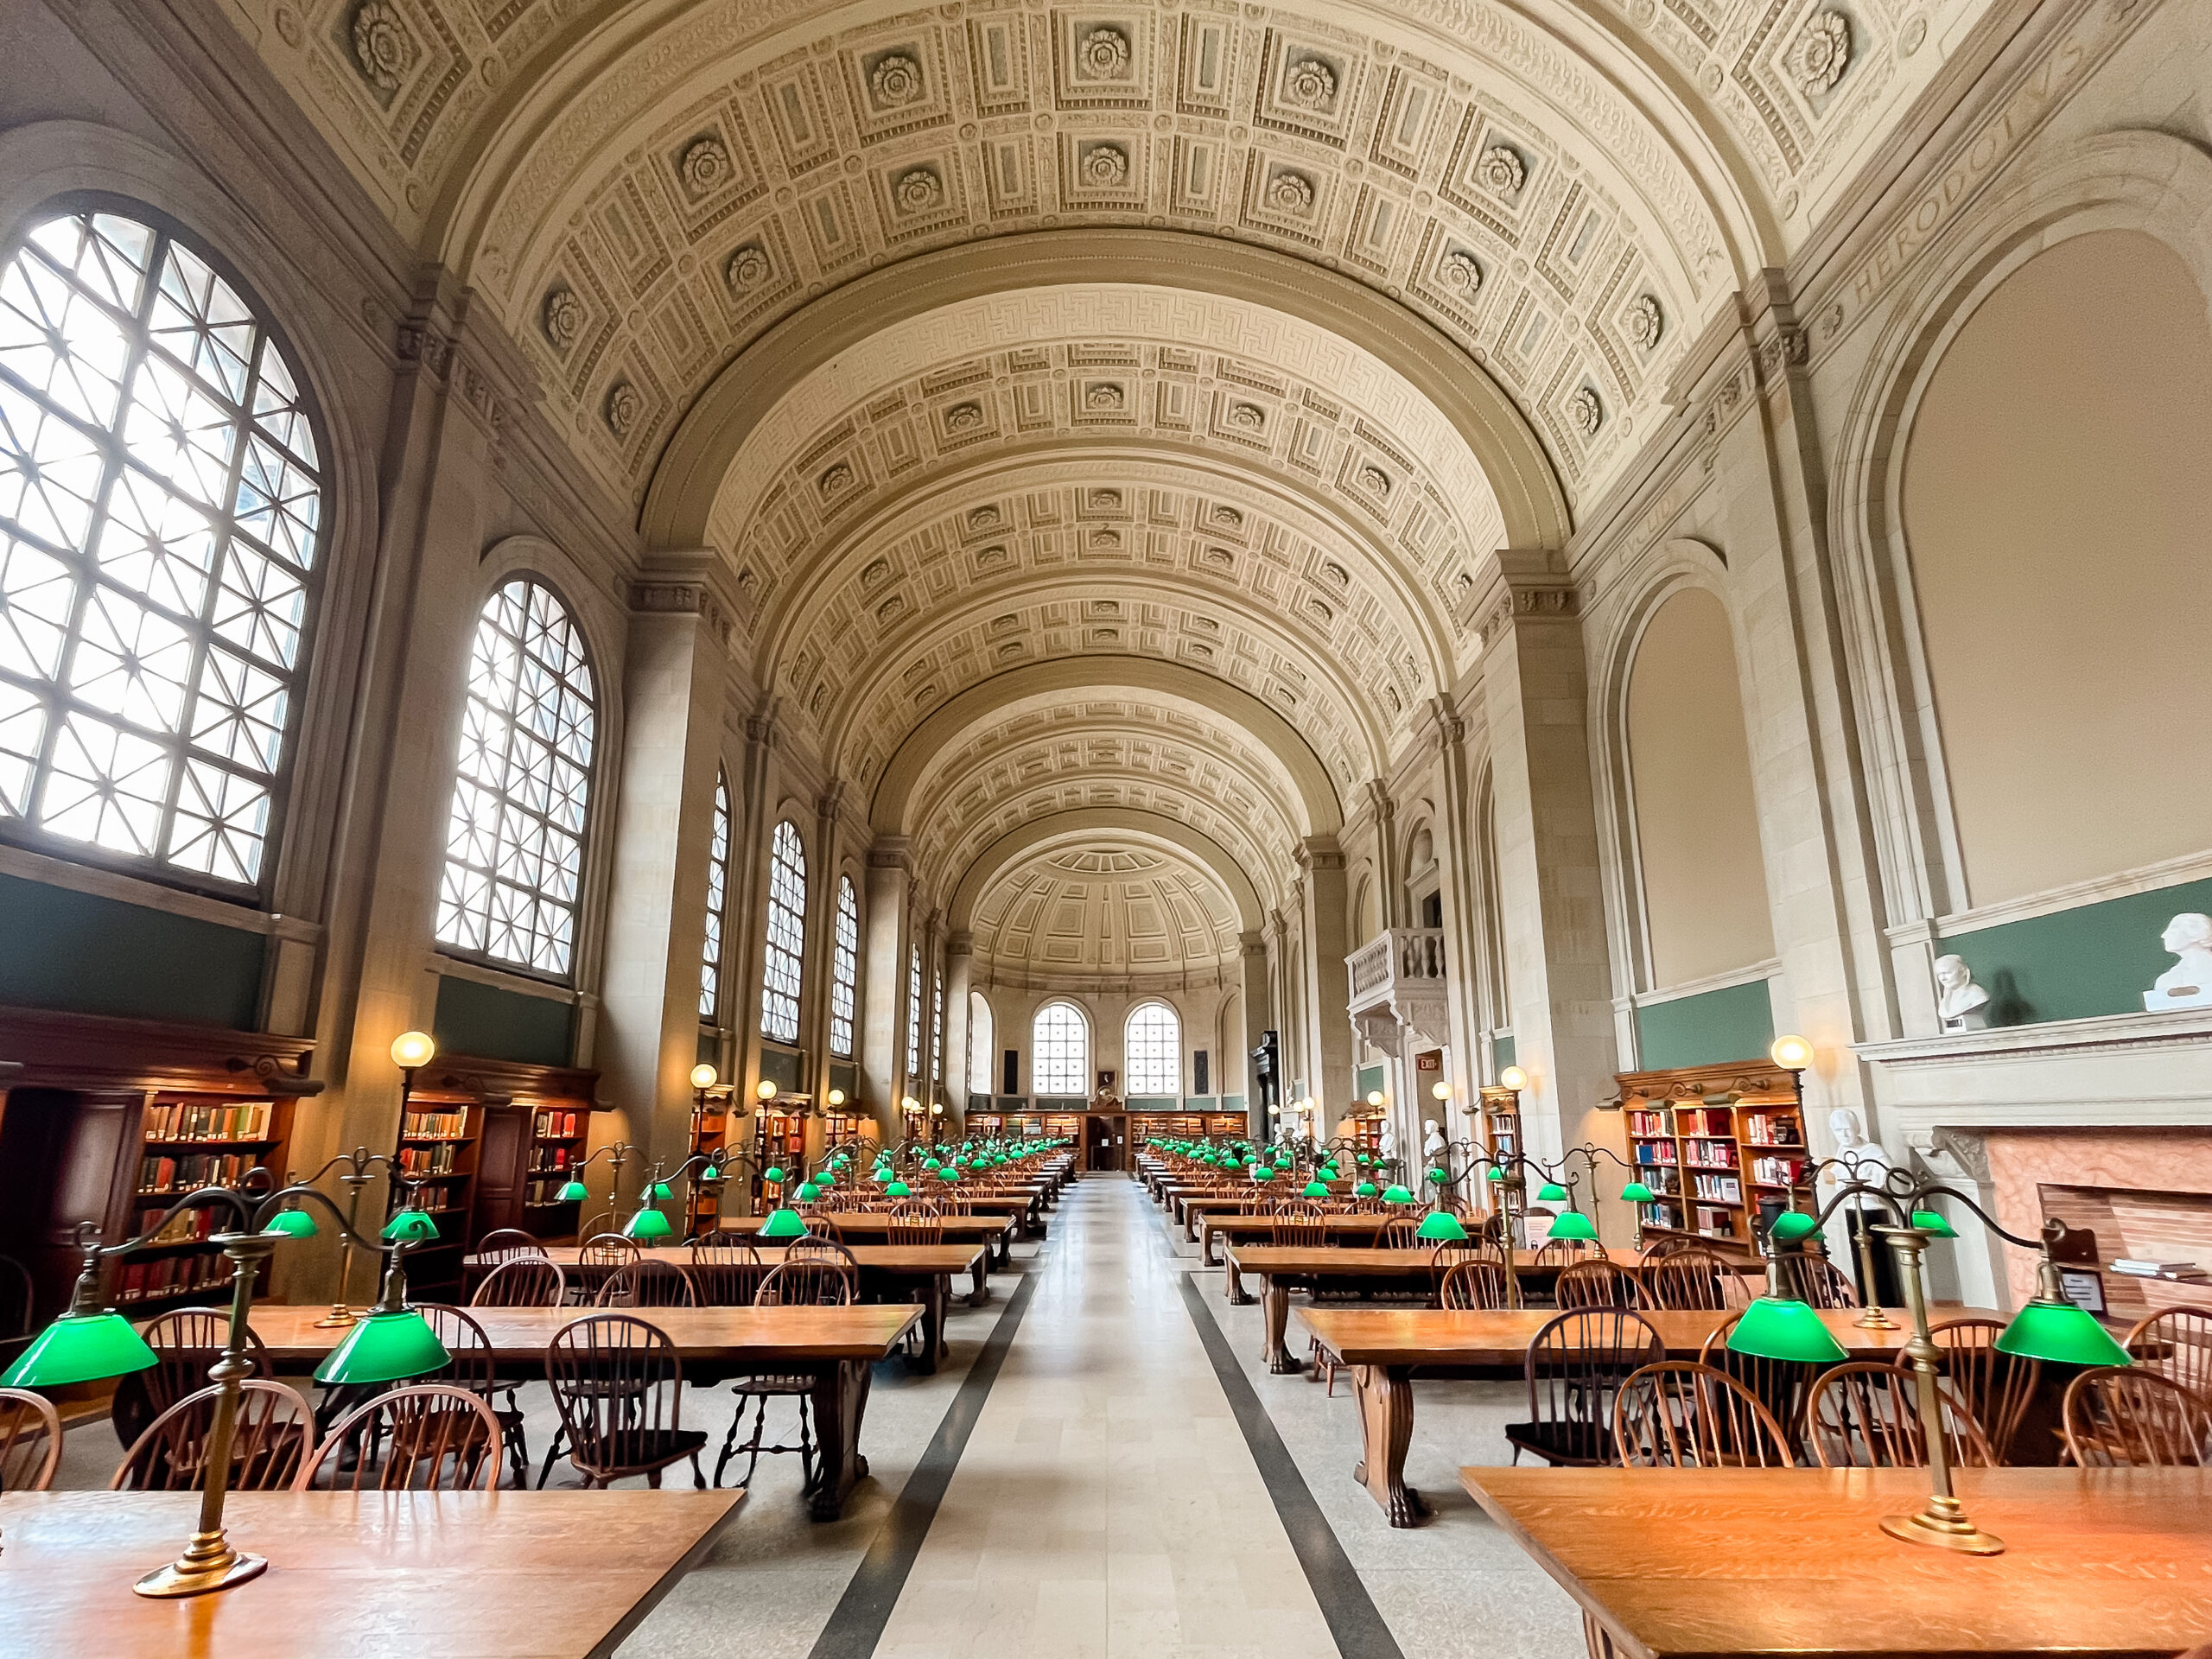 Bates Hall at the Boston Public Library is a wedding venue rich in history and charm. Bates Hall is located in the main McKim building and is easily the most recognizable room in the library. Bates Hall features a 50’ high barrel vault ceiling, walls covered in oak-paneled bookshelves, and large oak tables topped with green reading lanterns. Bates Hall is recognized to be, architecturally, one of the most noteworthy rooms in the world. With a capacity to seat 300 for an indoor ceremony and dinner and dancing, this stunning space is the perfect venue for providing you and your guests a luxe experience you will never forget.  